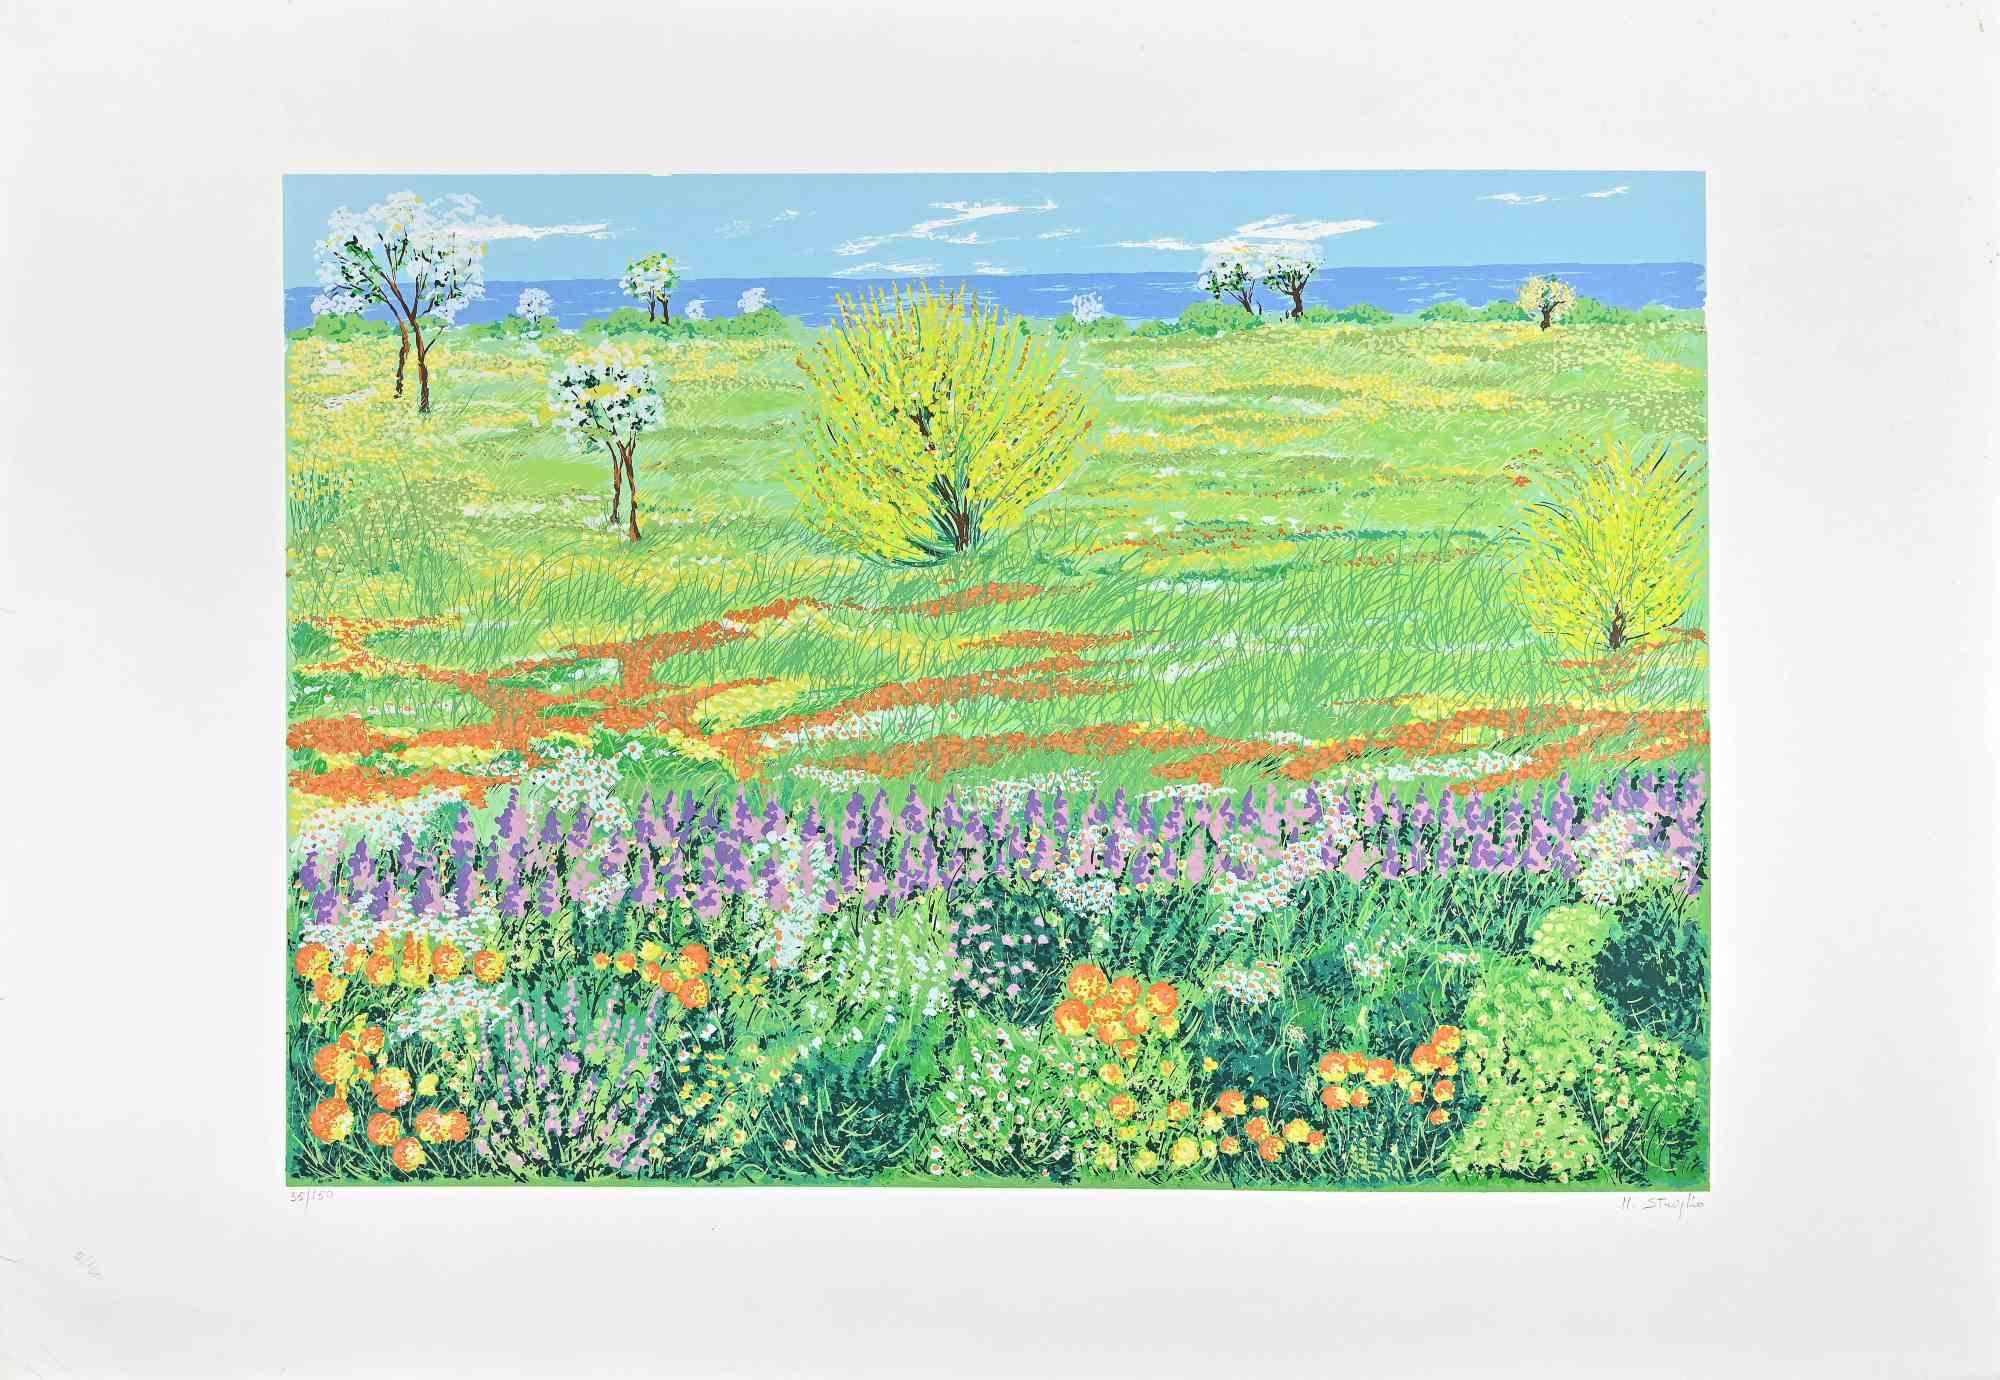 Meadow in Spring - Original Screen Print by M. Striglio - Late 20th century